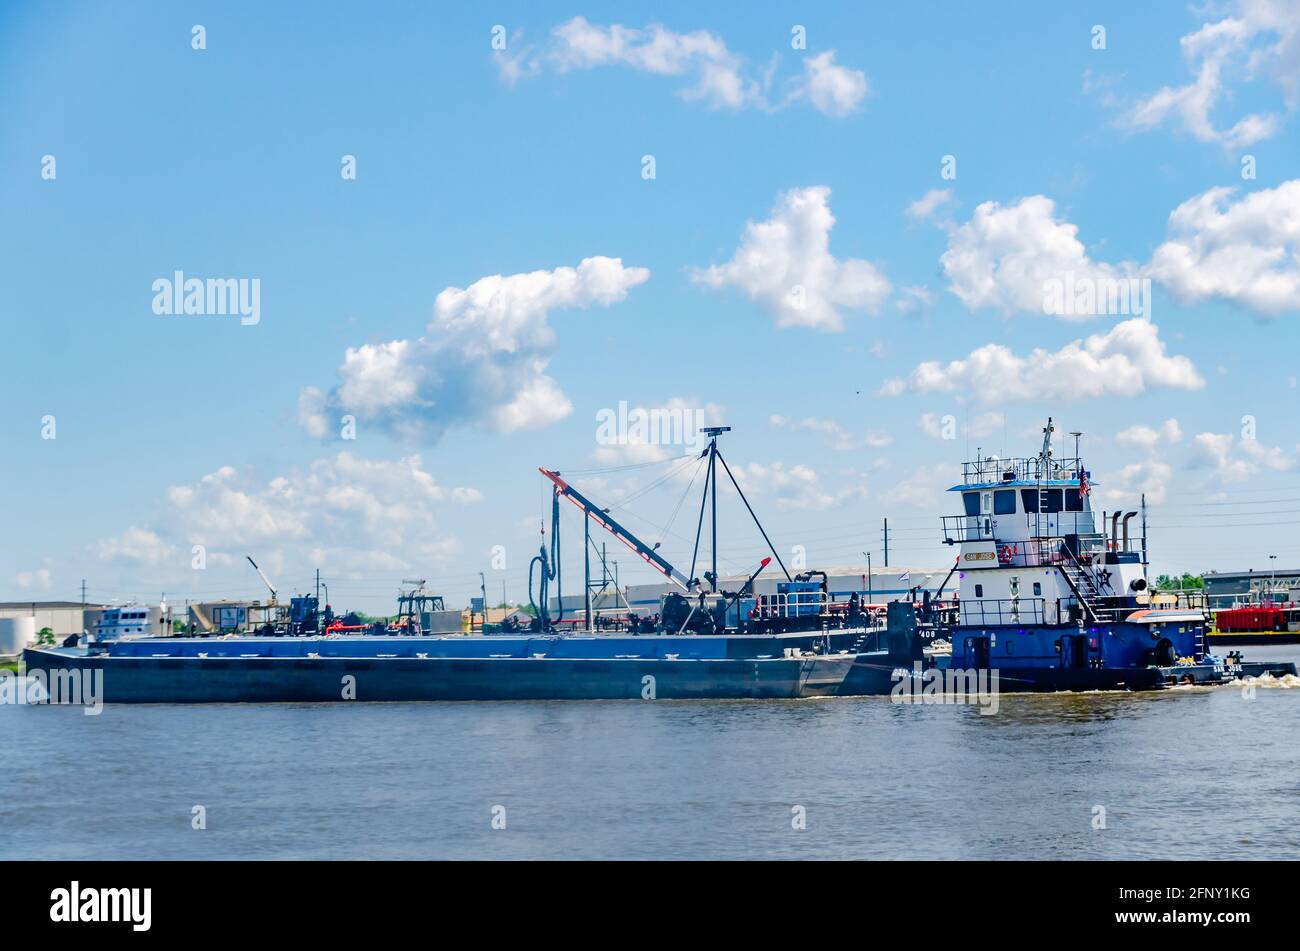 The San Jose tugboat, owned by Buffalo Marine Service, pushes a tank barge on the Mobile River, May 14, 2021, in Mobile, Alabama. Stock Photo